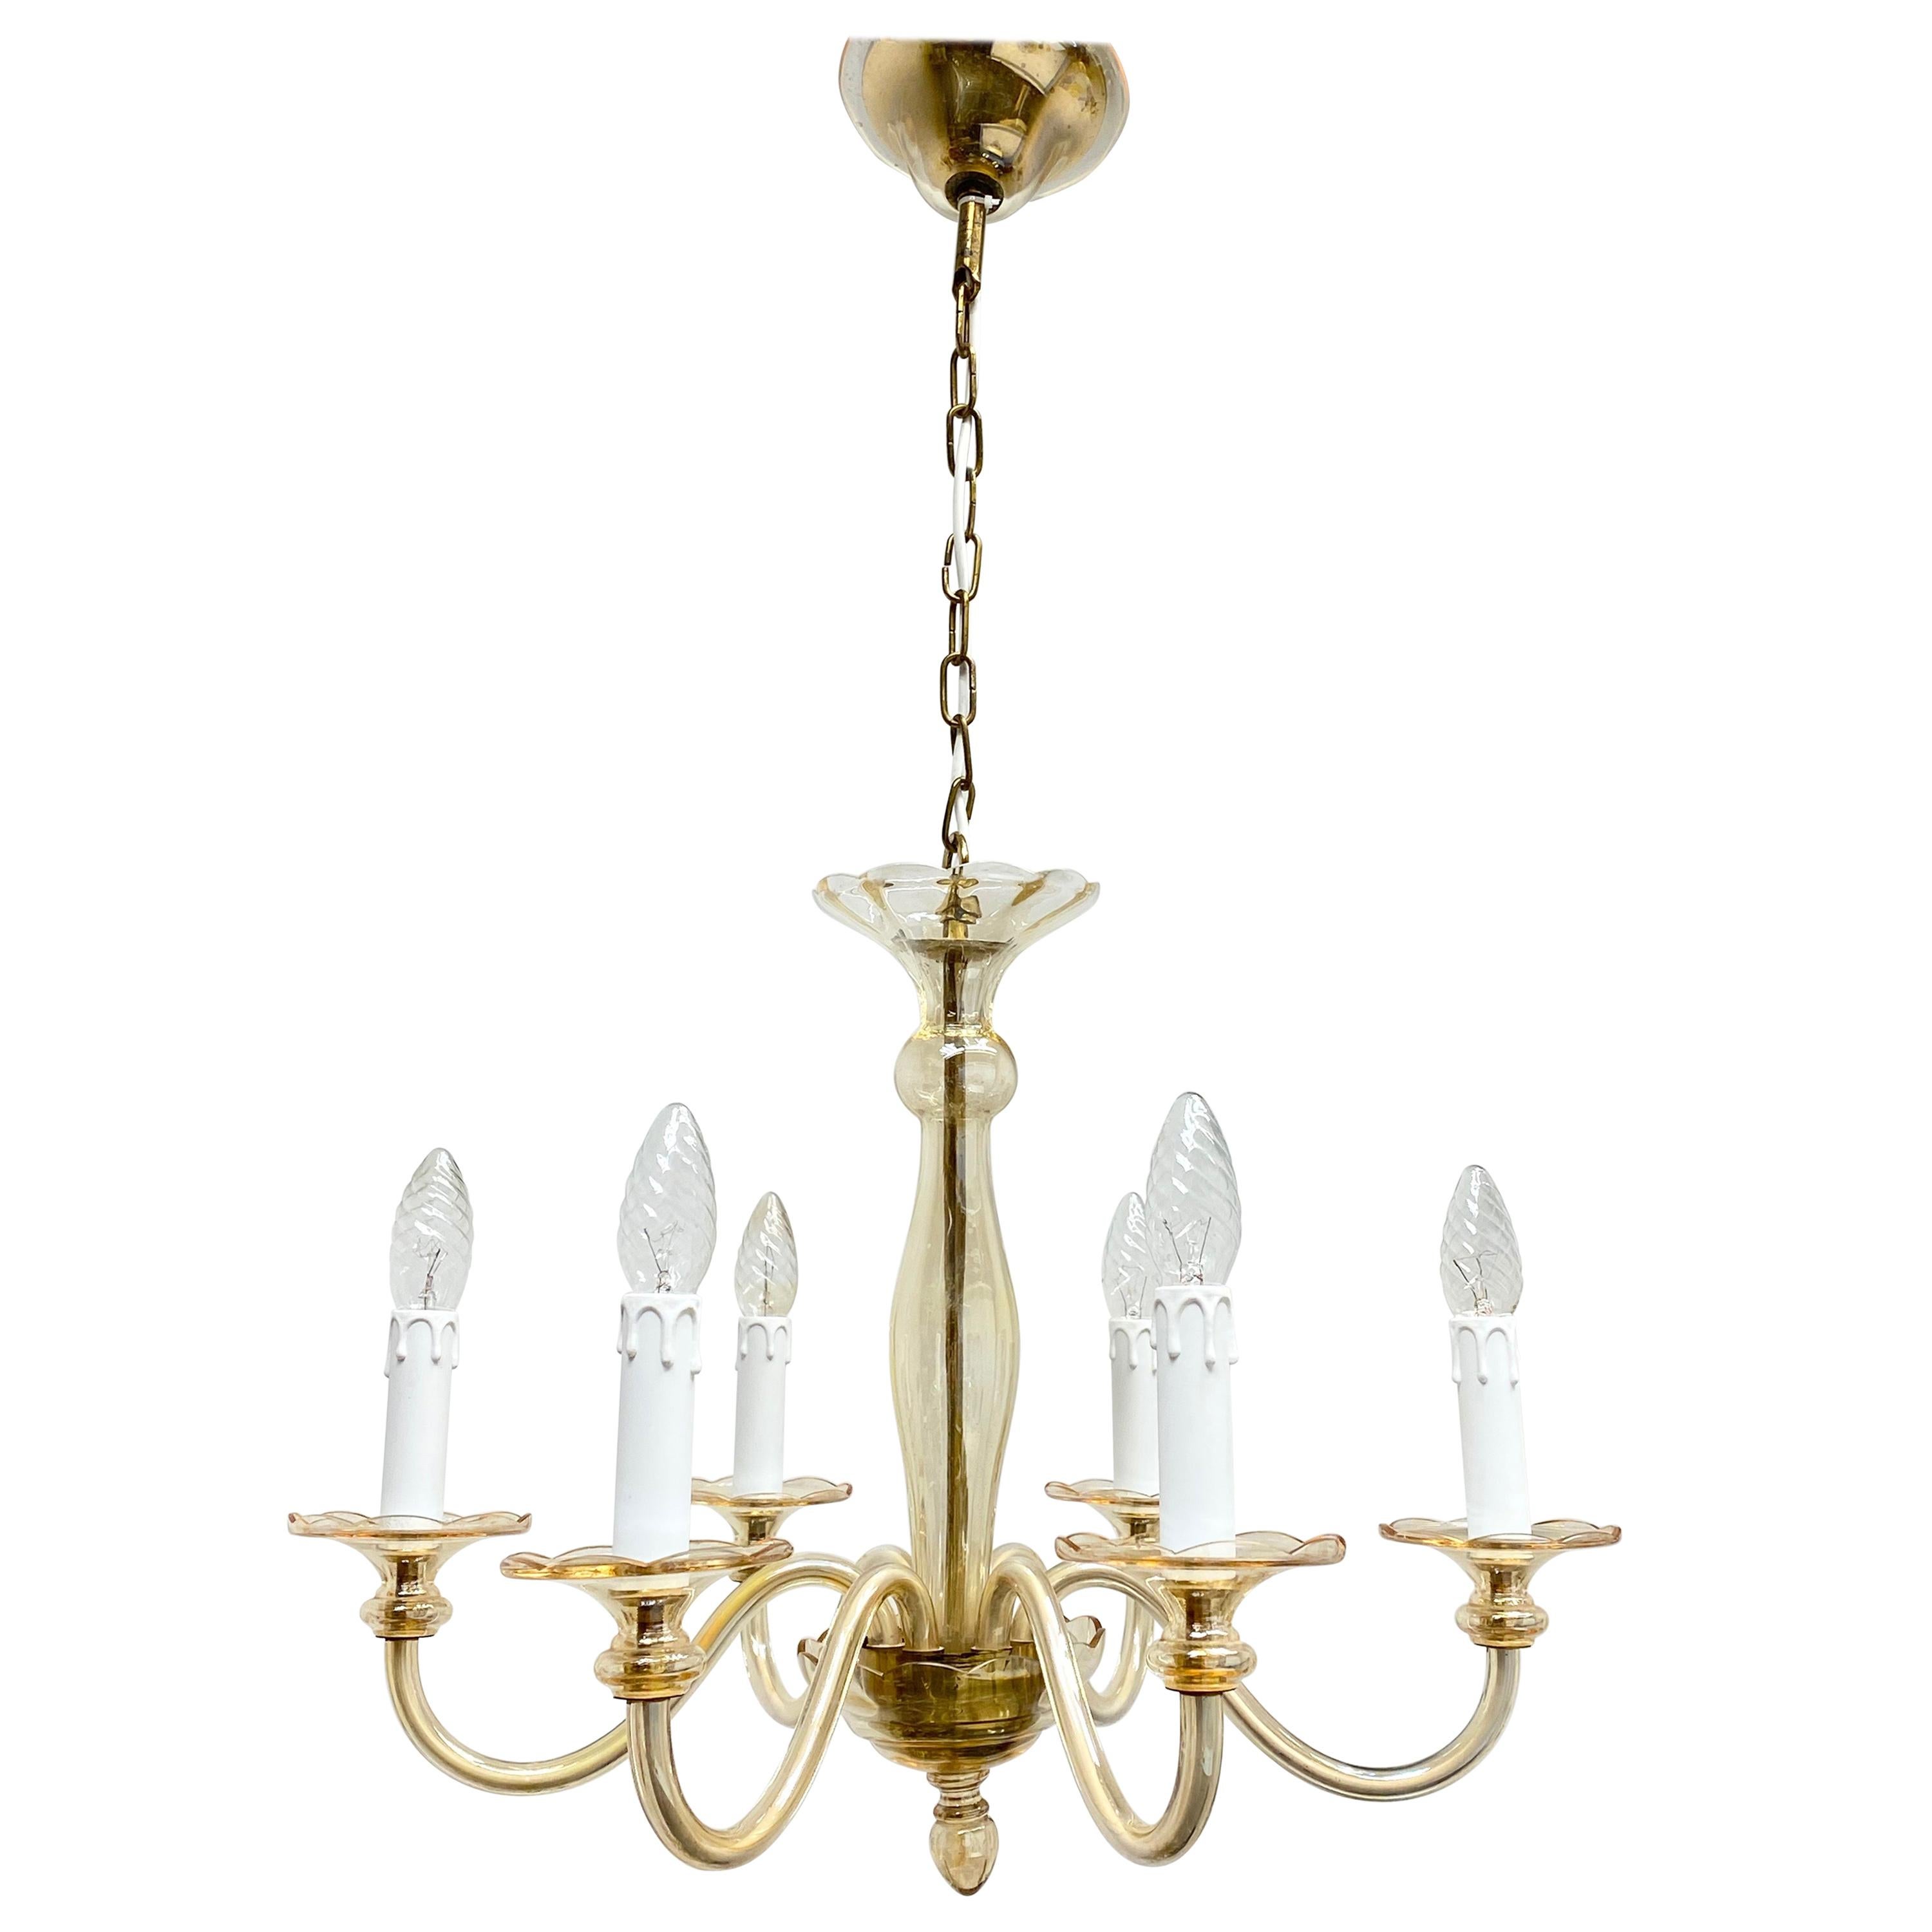 Hollywood Regency Art Deco Style Amber Murano Glass Chandelier, Italy, 1960s